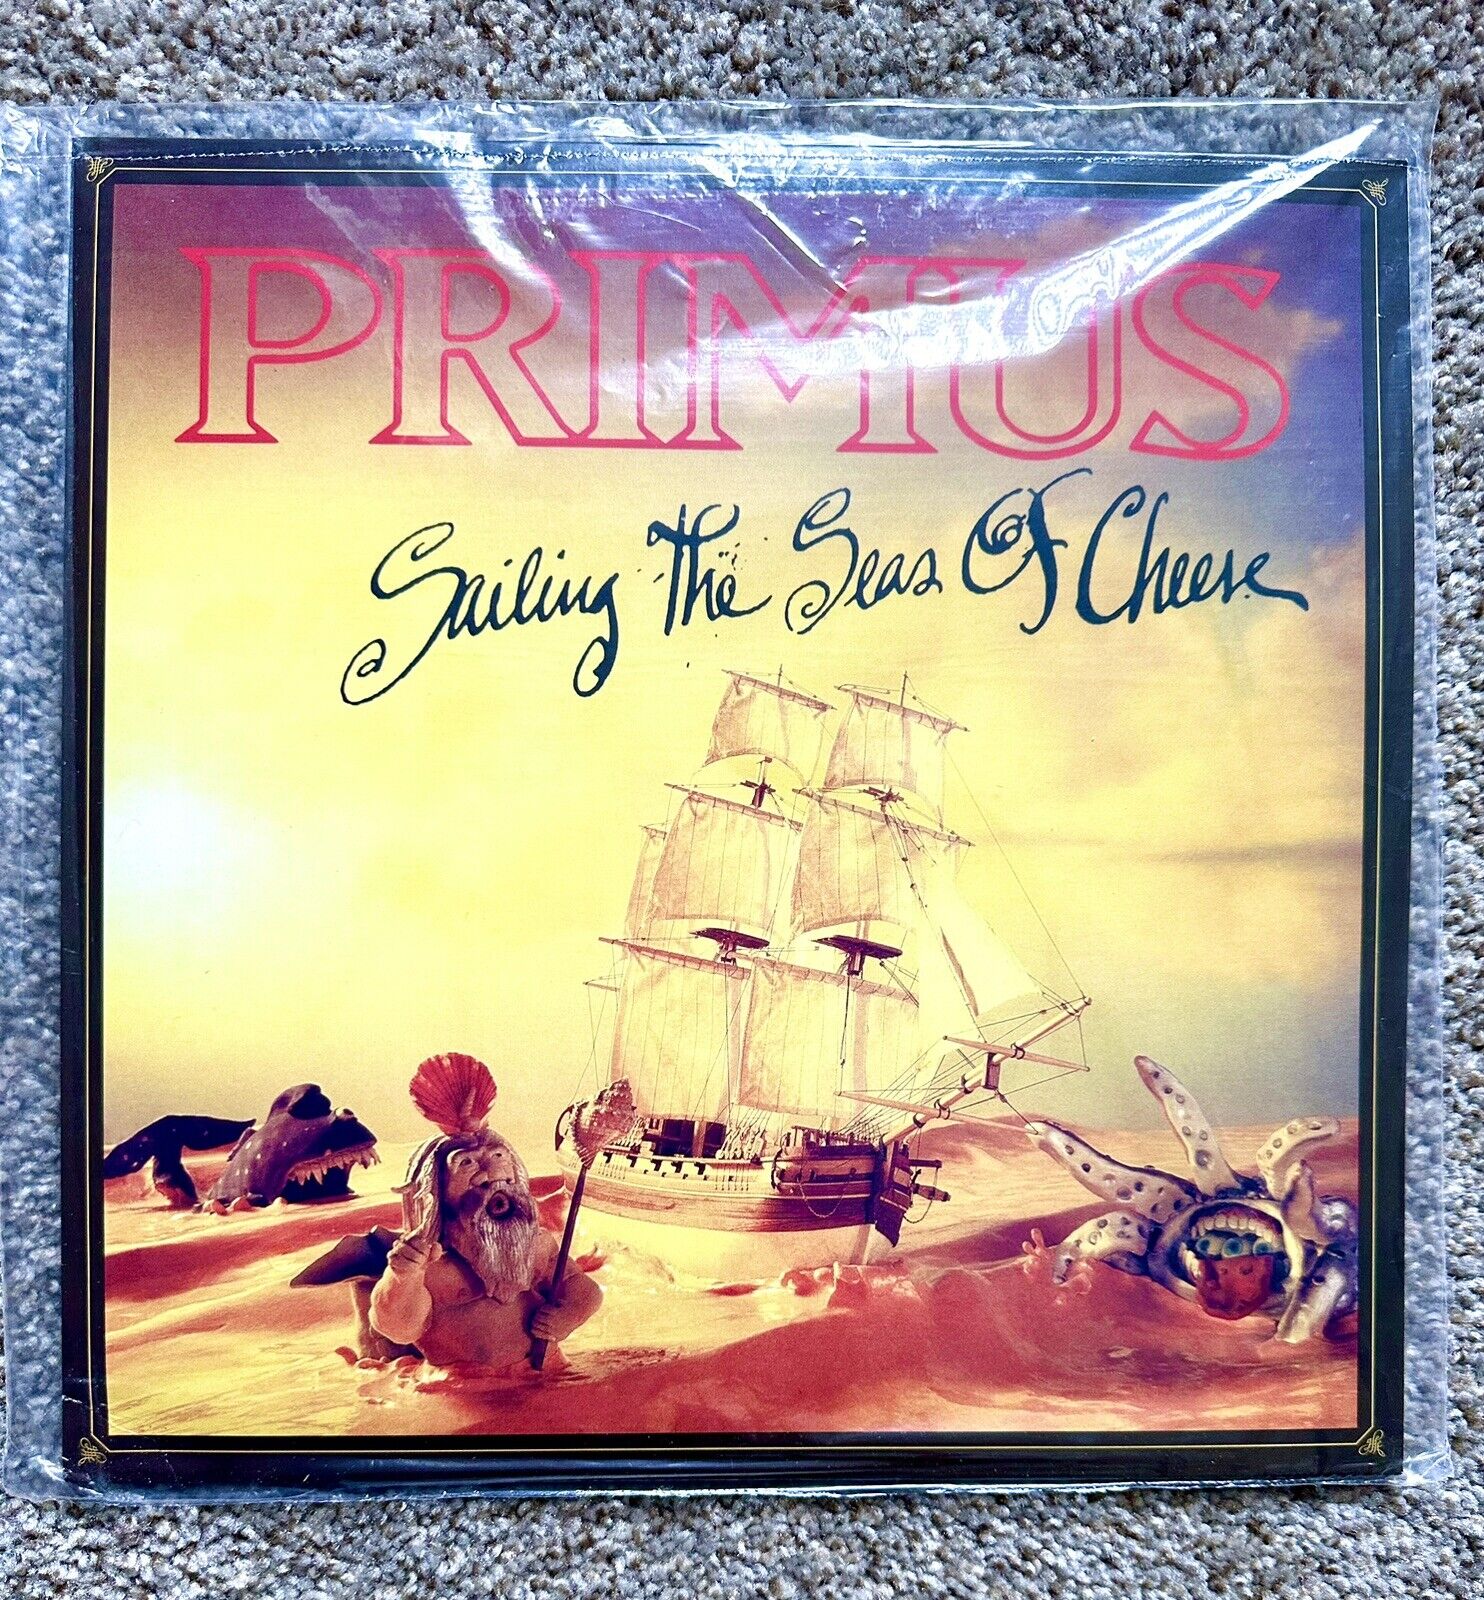 Primus Sailing the Seas Of Cheese Vinyl LP BRAND NEW SEALED In Shrink RARE OOP